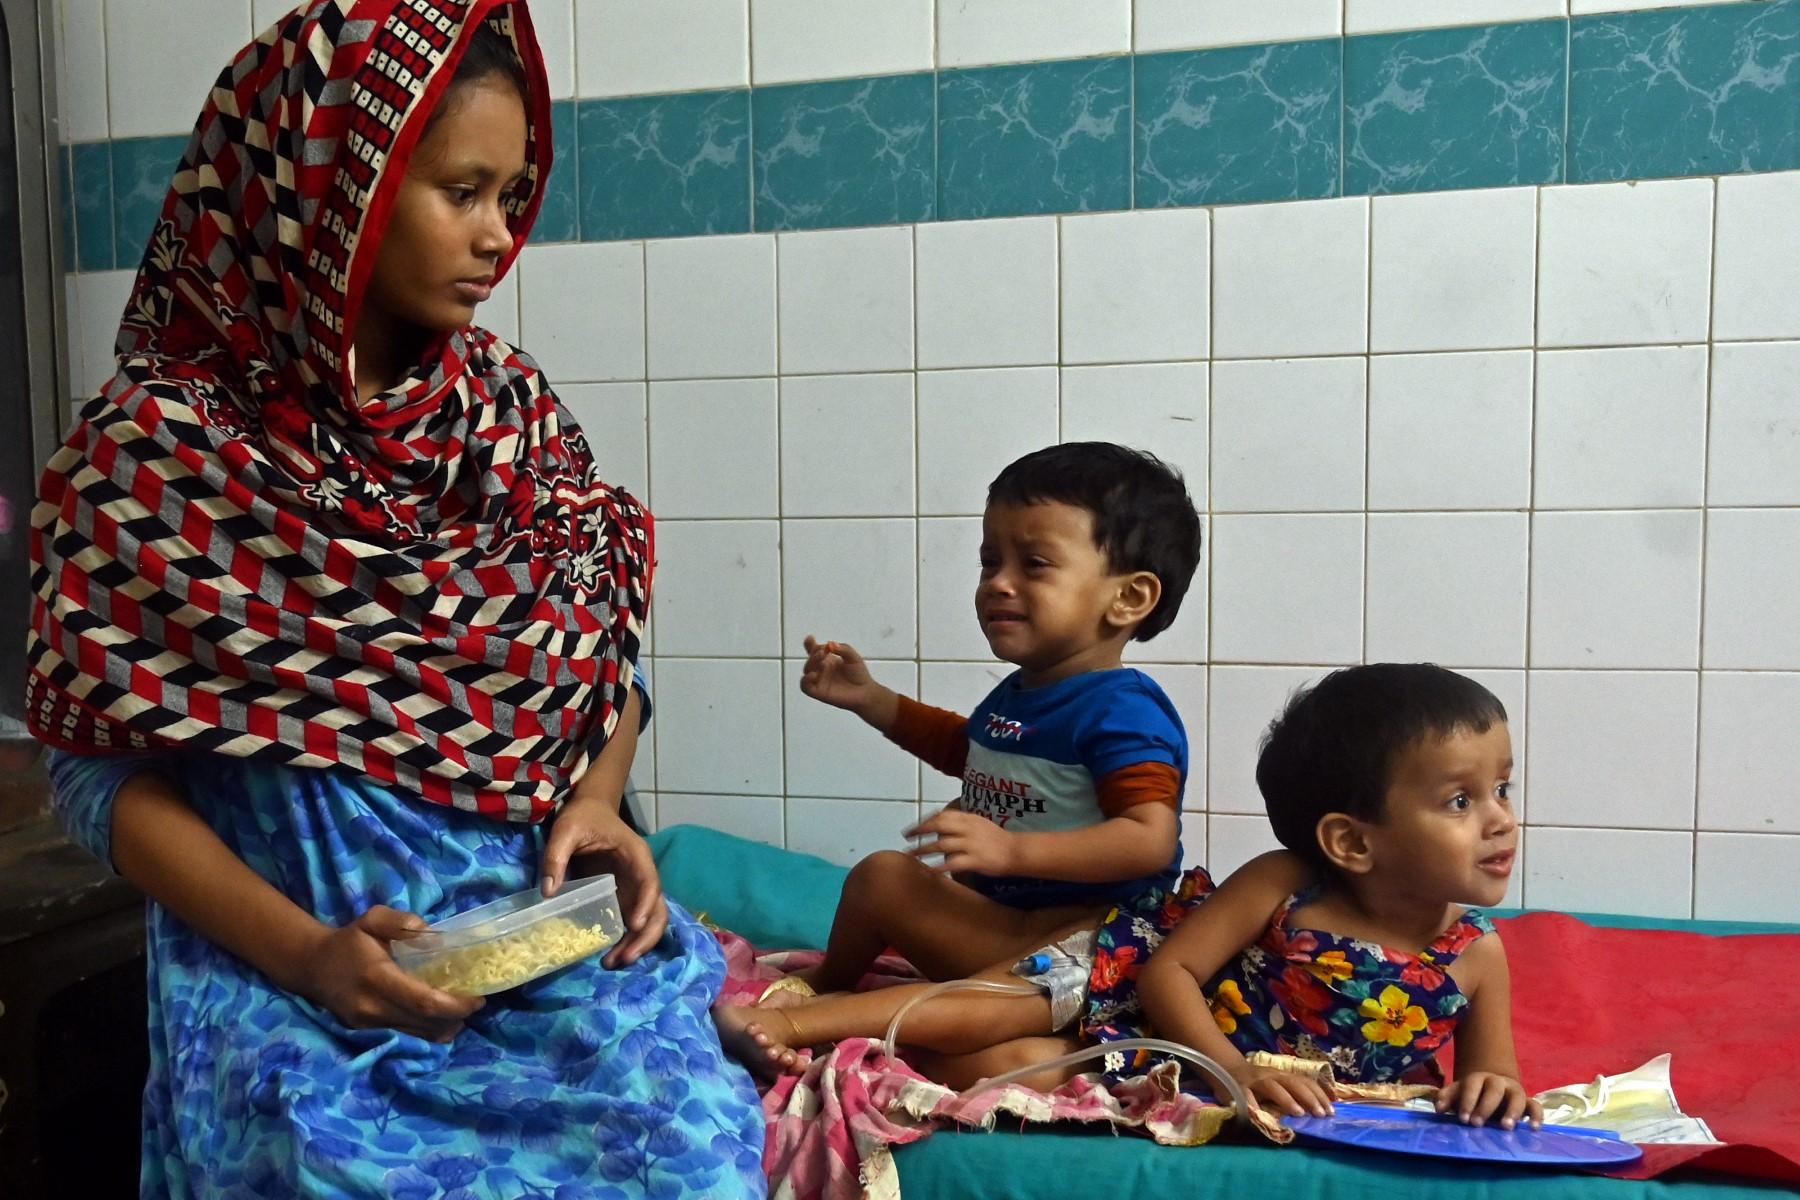 The conjoined twins Lamisa (R) and Labiba sit beside their mother Monufa on the eve of their surgery at a hospital in Dhaka on Dec 12. Photo: AFP